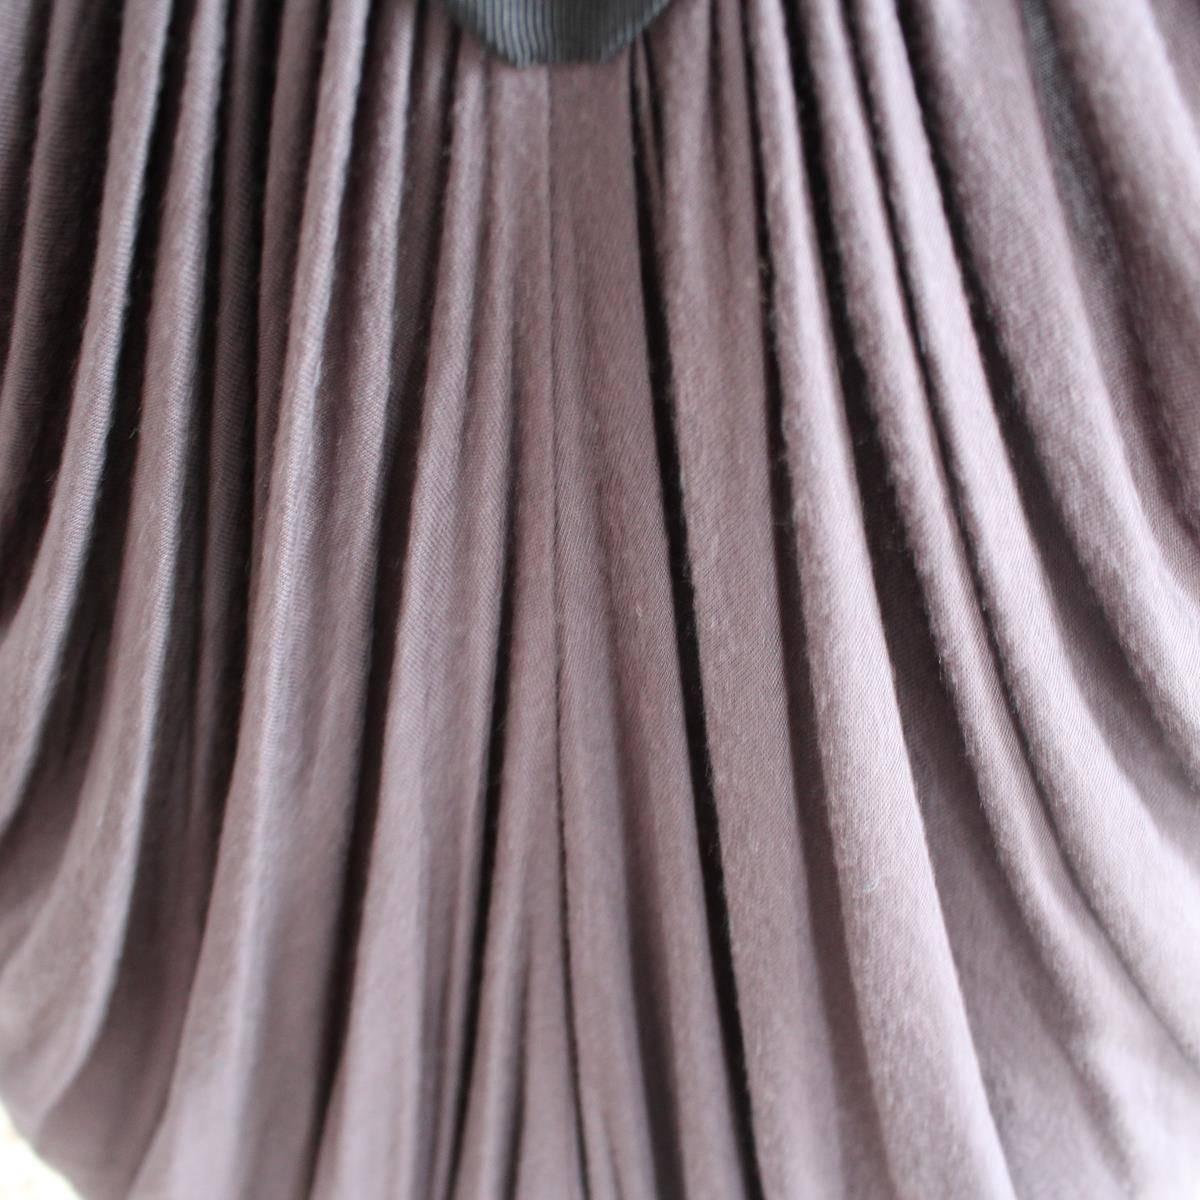 Beautiful and unusual Lanvin dress
Cotton and silk
Grey color
Central zip
